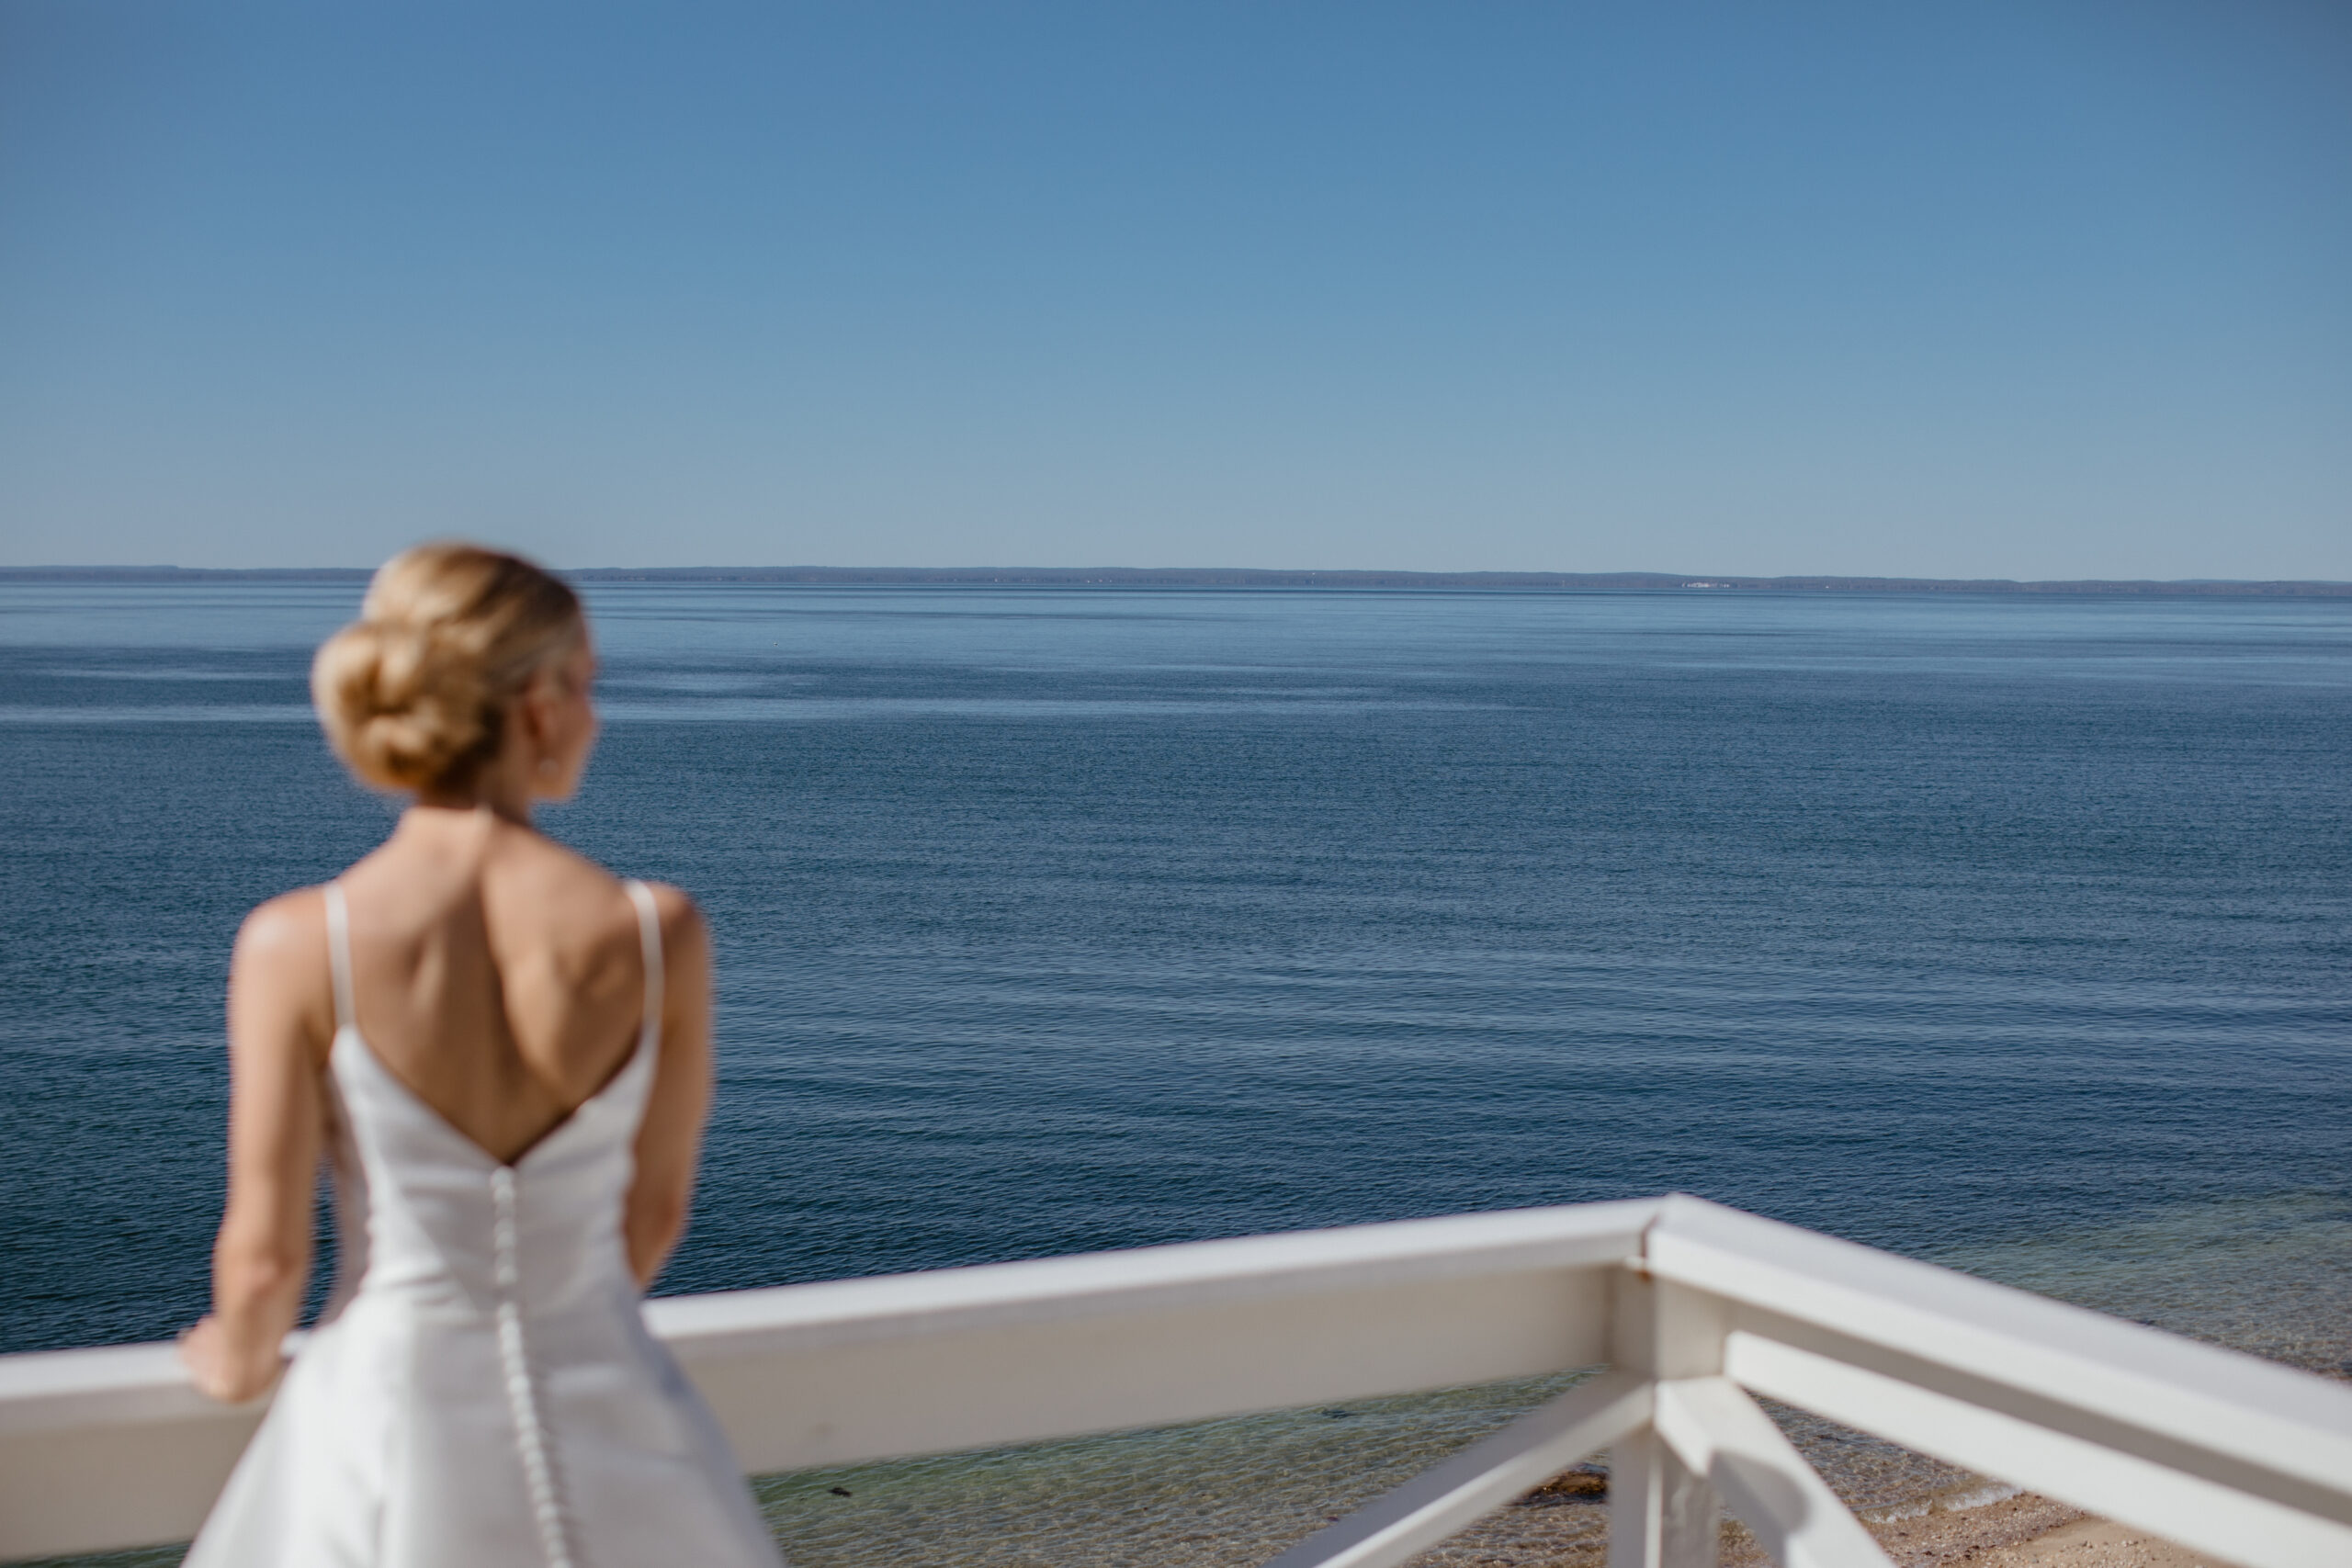 Bride looks out at the ocean in the final moments of prep before her wedding day